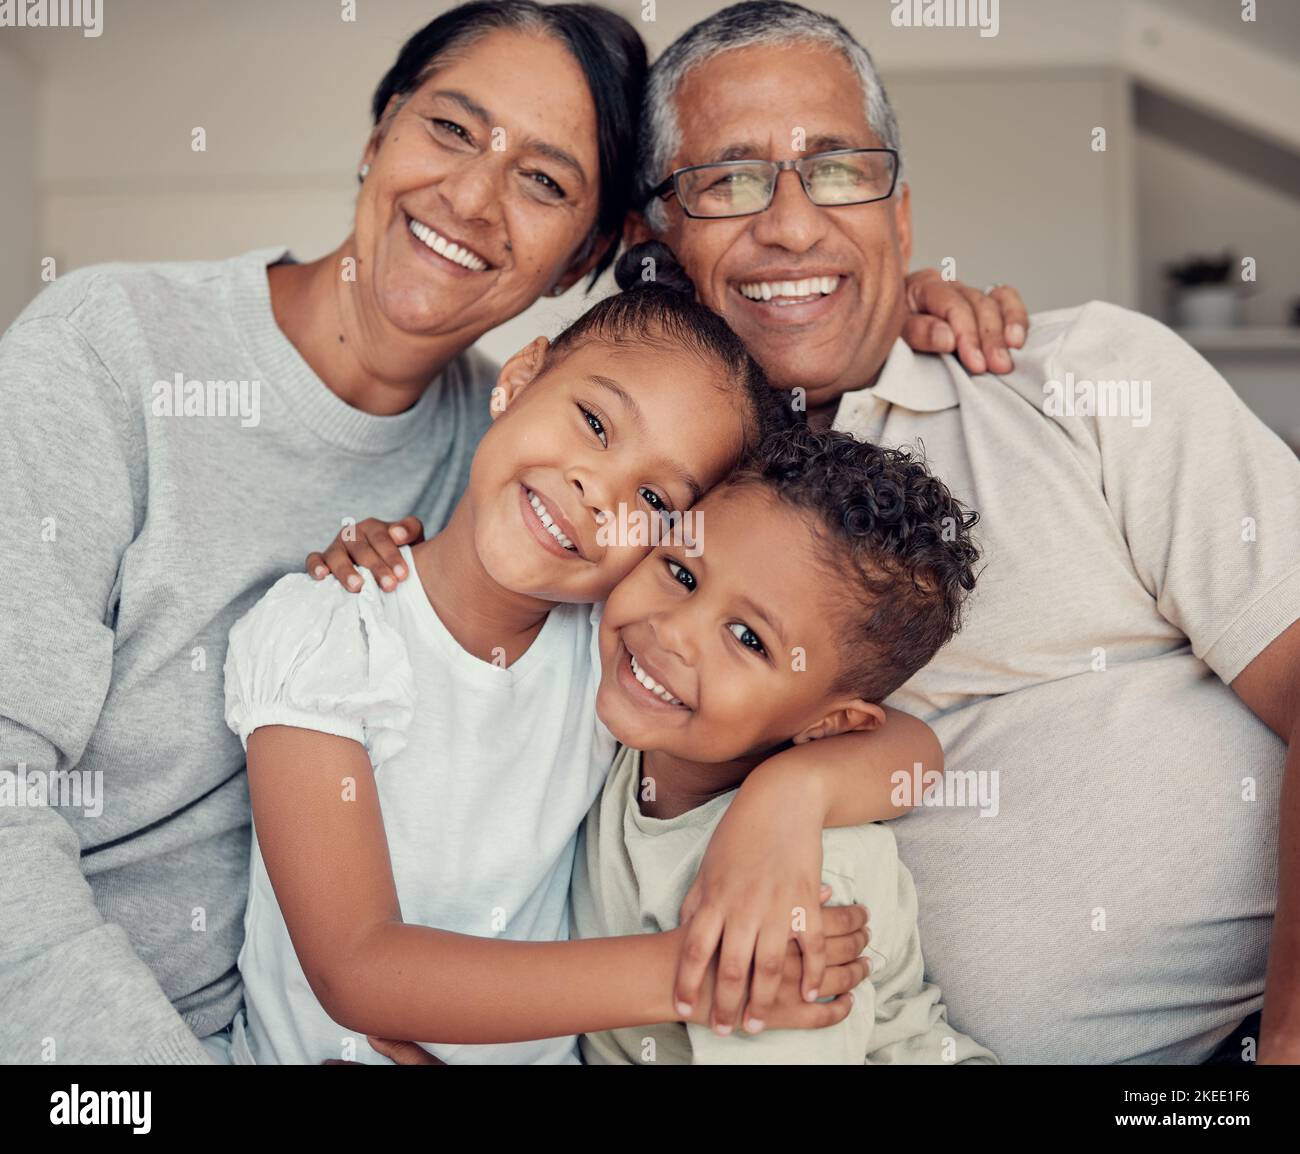 Family portrait, happiness and love of children and grandparents with a smile, hug and support while together on a living room couch at home. Face Stock Photo